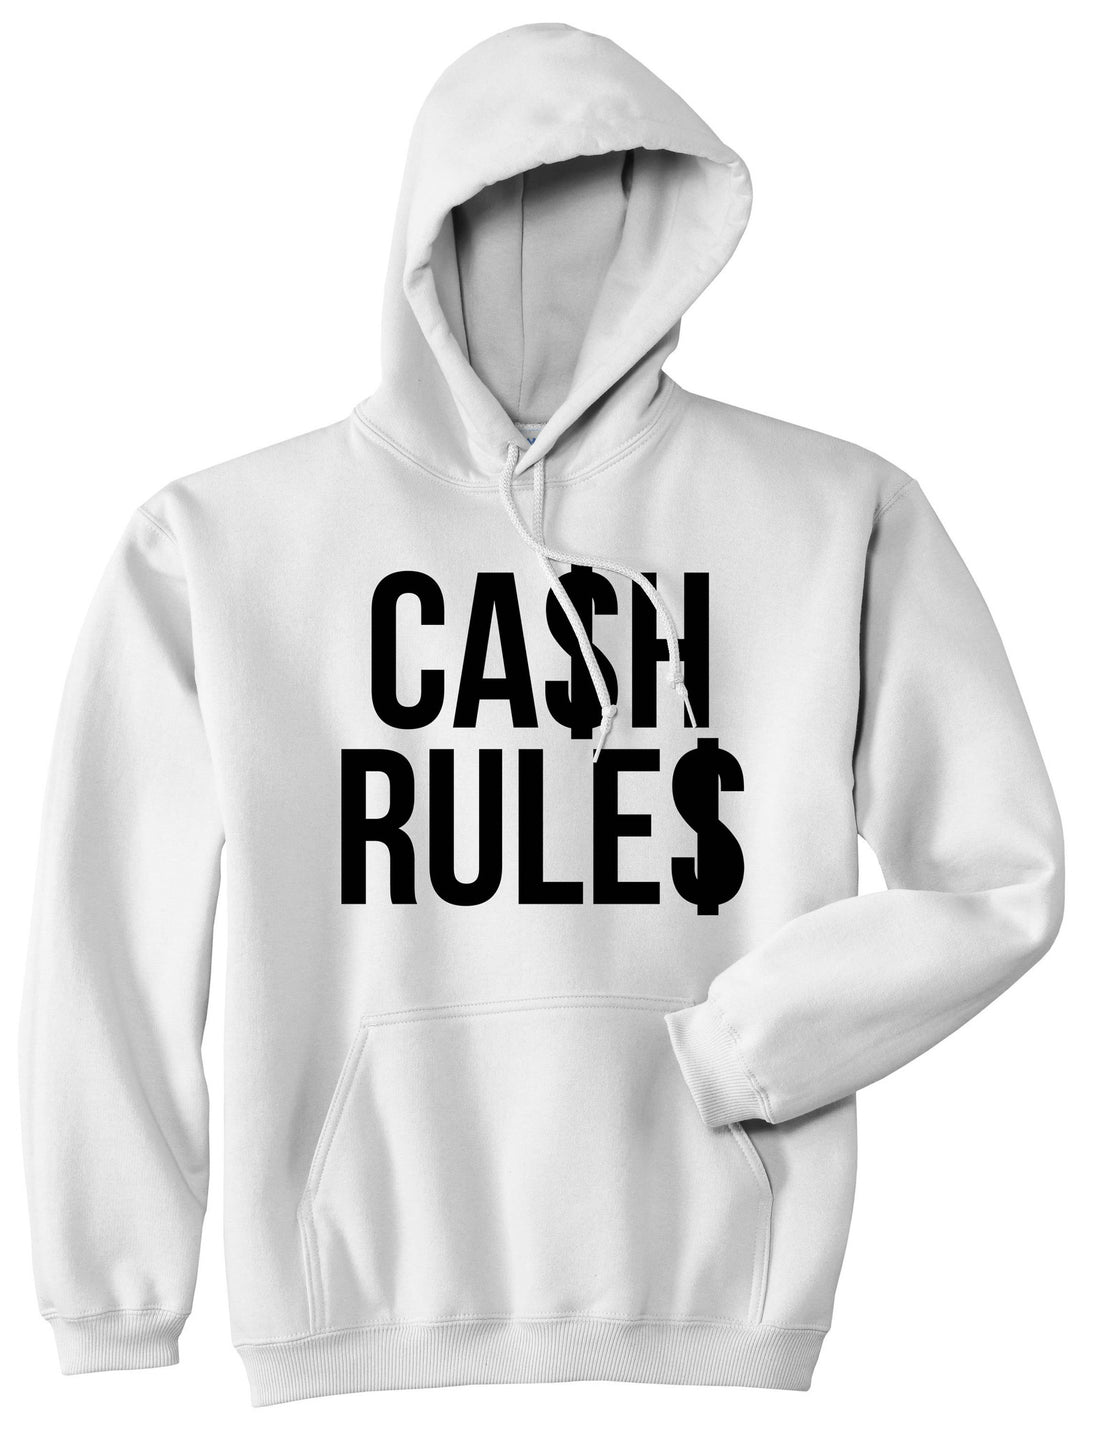 Cash Rules Pullover Hoodie Hoody in White by Kings Of NY